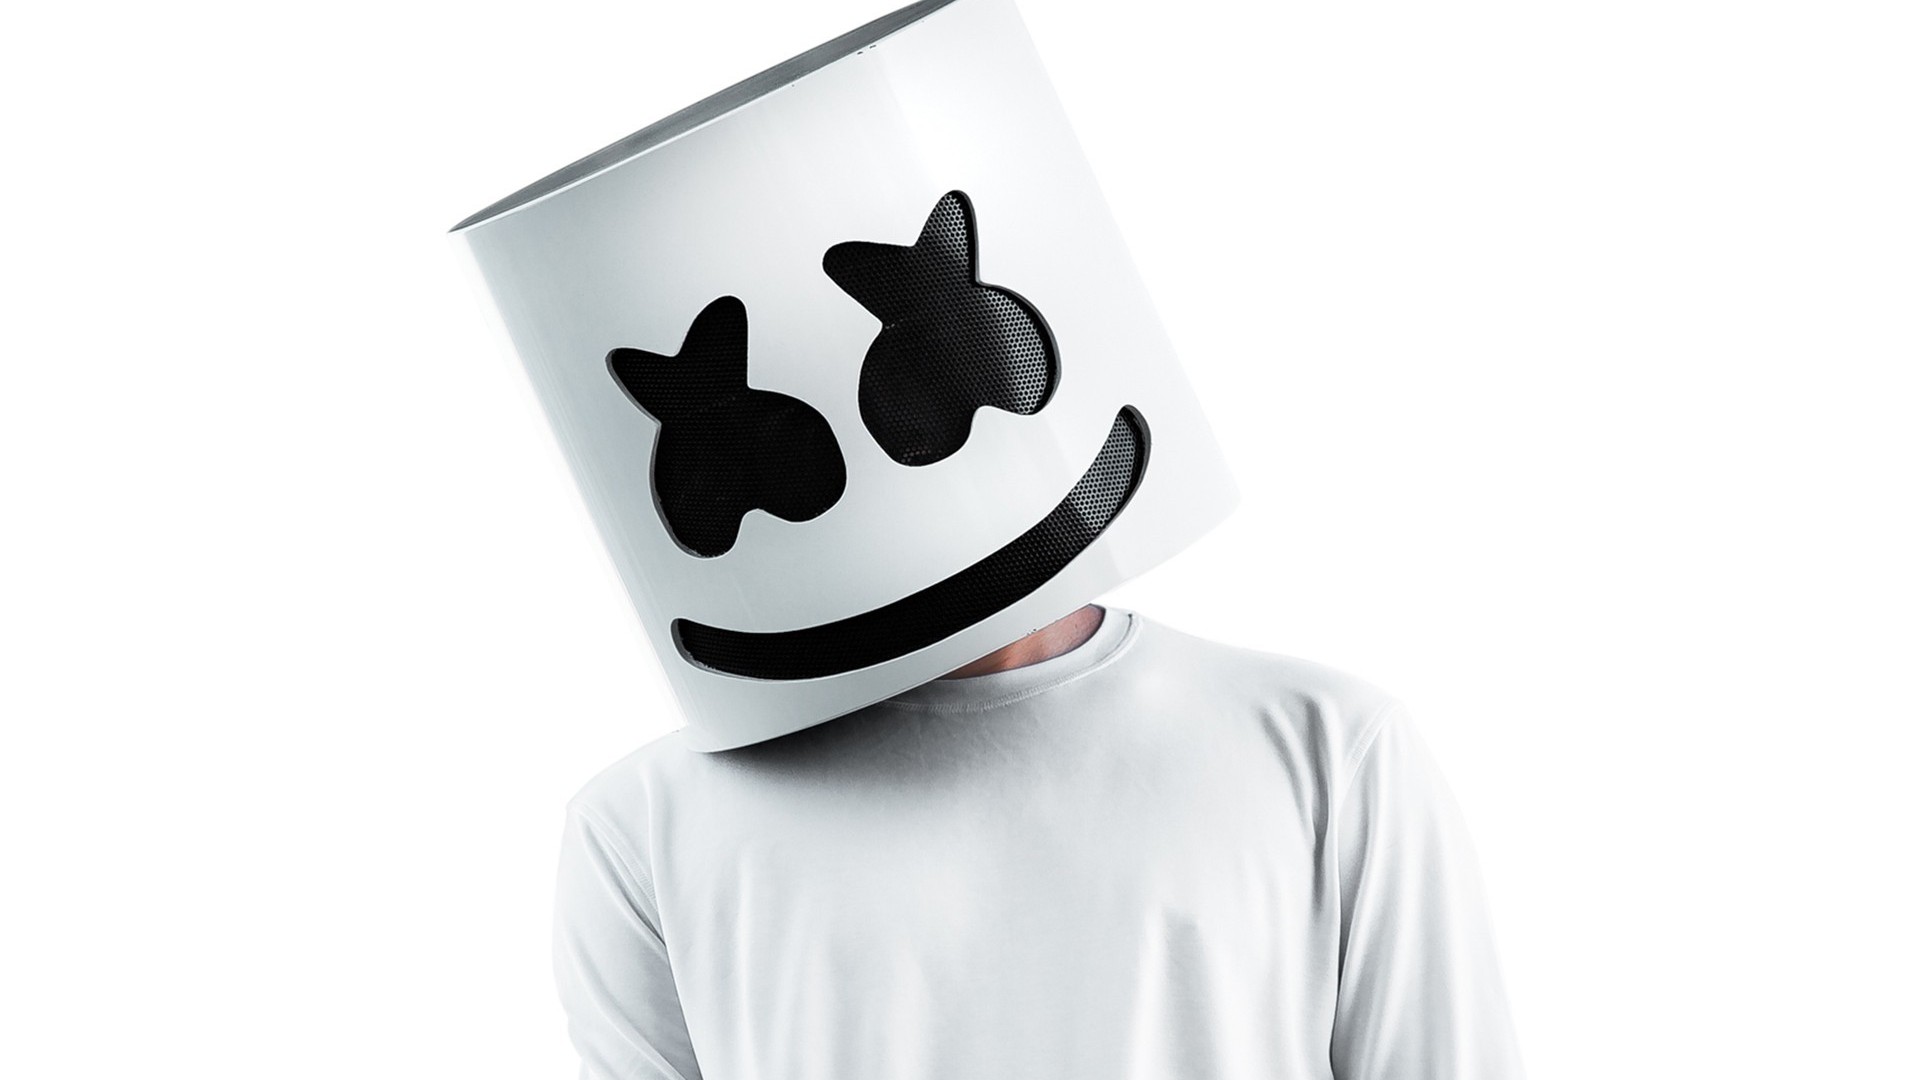 HD Marshmello Backgrounds with high-resolution 1920x1080 pixel. You can use this wallpaper for your Windows and Mac OS computers as well as your Android and iPhone smartphones